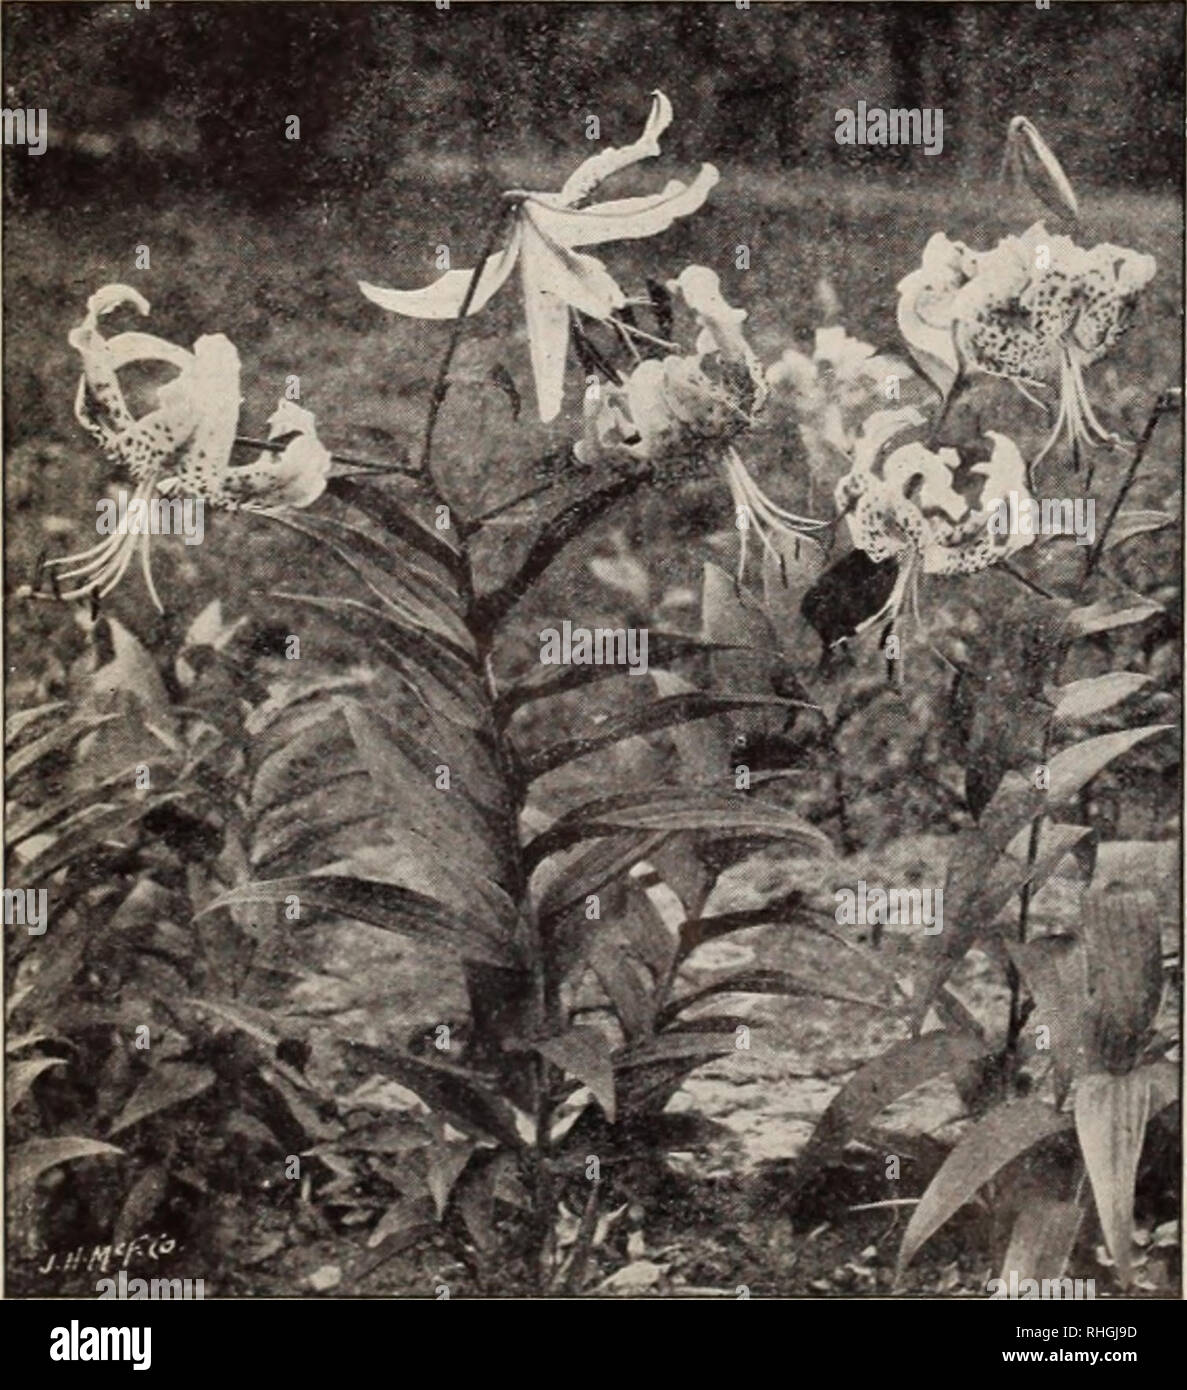 . Boddington's quality bulbs, seeds and plants / Arthur T. Boddington.. Nursery Catalogue. Lilium auratum (type) RARE LILIUM AURATUMS LILIUM AURATUM MACRANTHUM. Another grand type of the Golden-banded Lily. Large bulbs, 50 cts. each, $4 per doz., $30 per :,ooo.. Lilium speciosum (type) LILIUM AURATUM PICTUM, A very choice Each Doz. 100 tj'pe of Liliinn auratum ; pure white, with red and yellow bands through each petal. Large bulbs ...$o 30 $3 00 $20 00 LILIUM AURATUM PLATYPHYLLUM. A very strong and vigorous type of L. anrattim. Flowers of immense size, pure ivory-white, with a deep golden band Stock Photo